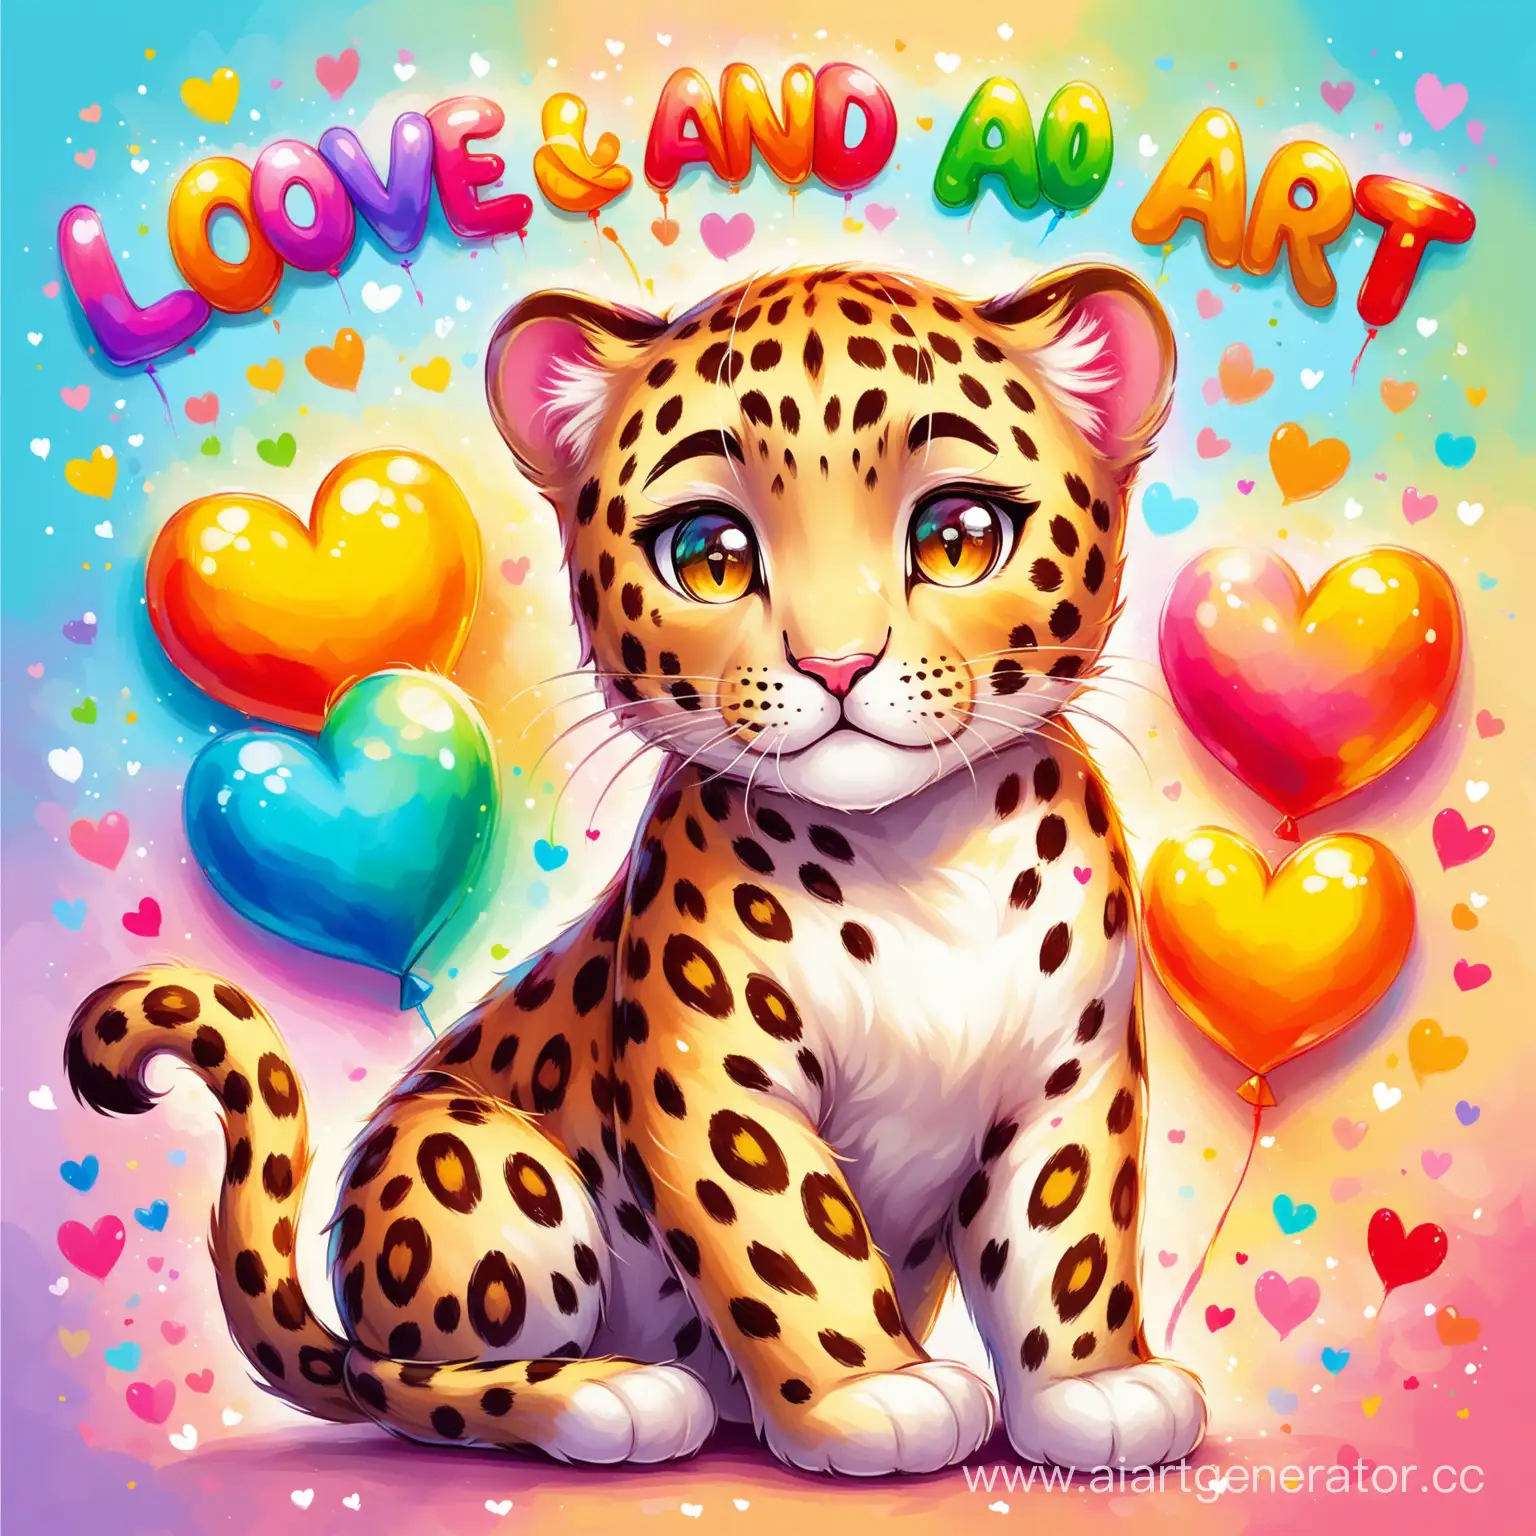 Cute-Leopard-in-Vibrant-Oil-Painting-with-Love-and-Art-Message